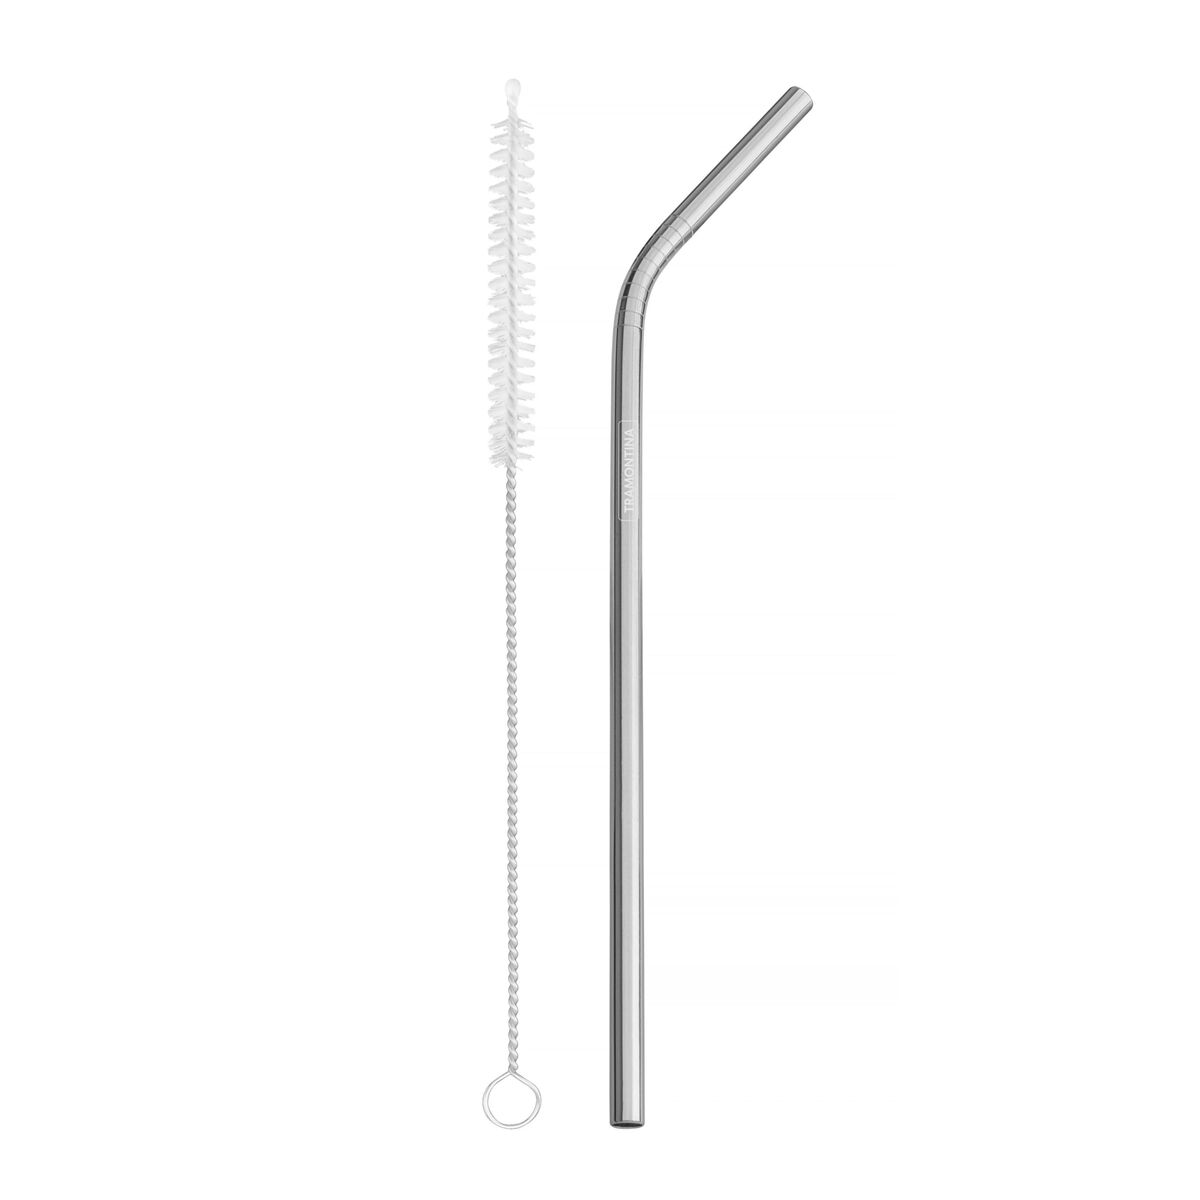 Tramontina stainless steel drinking straw set with cleaning brush, 2 pc set